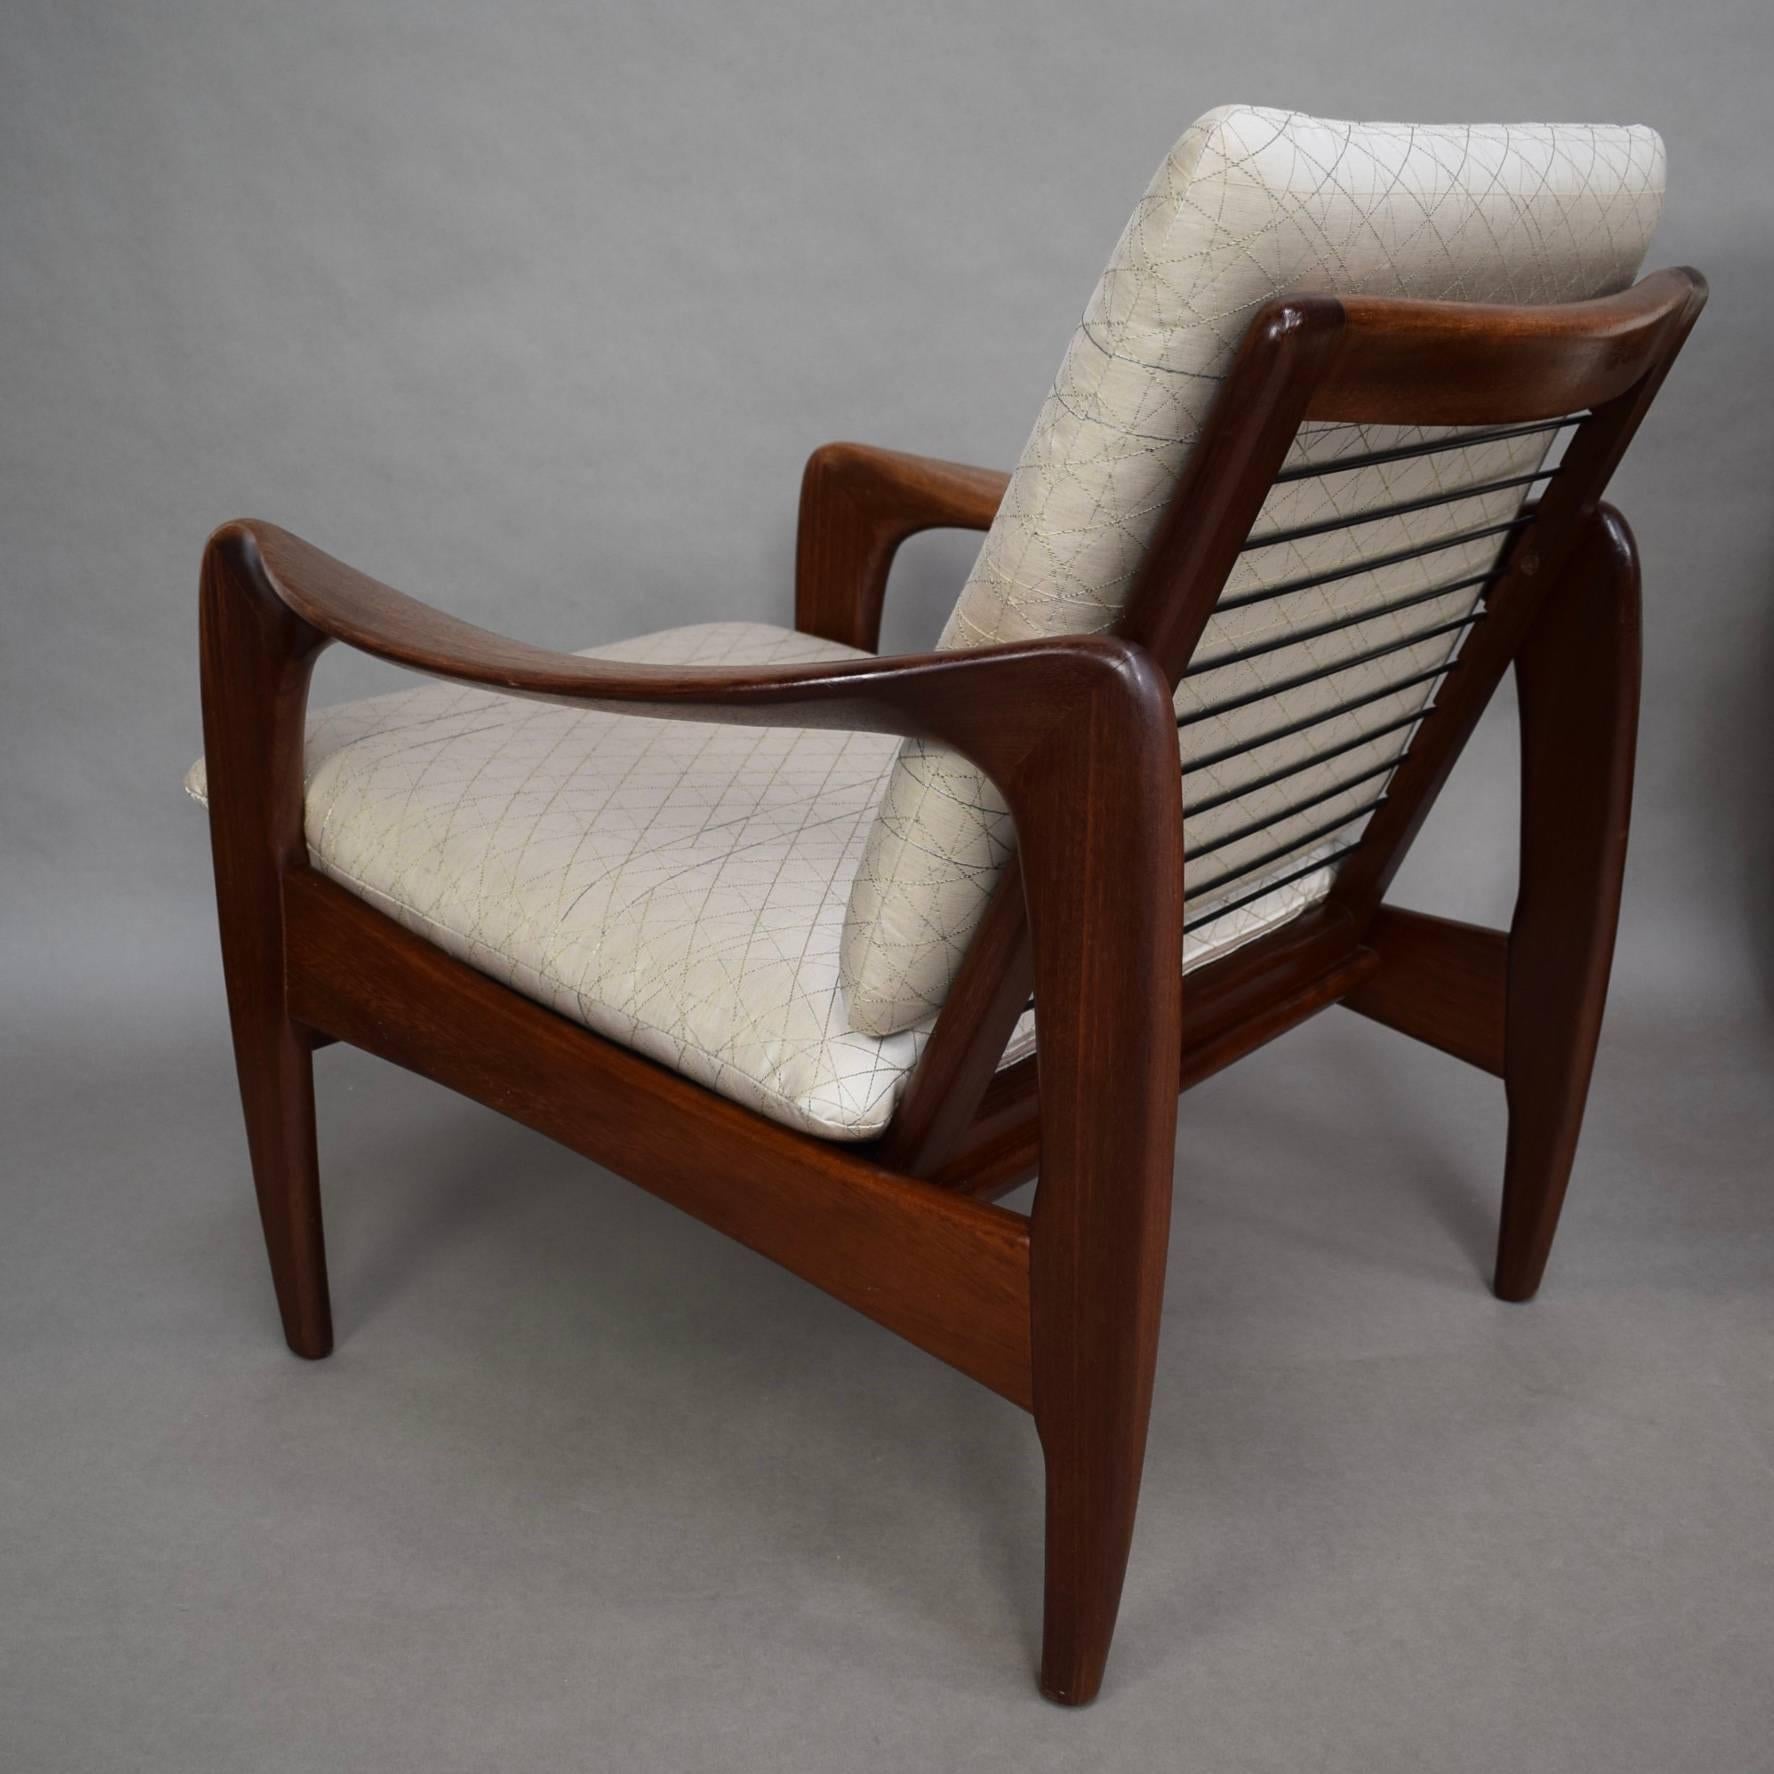 Fabric Pair of Teak Lounge Chairs by De Ster Gelderland, 1960s, New Upholstery